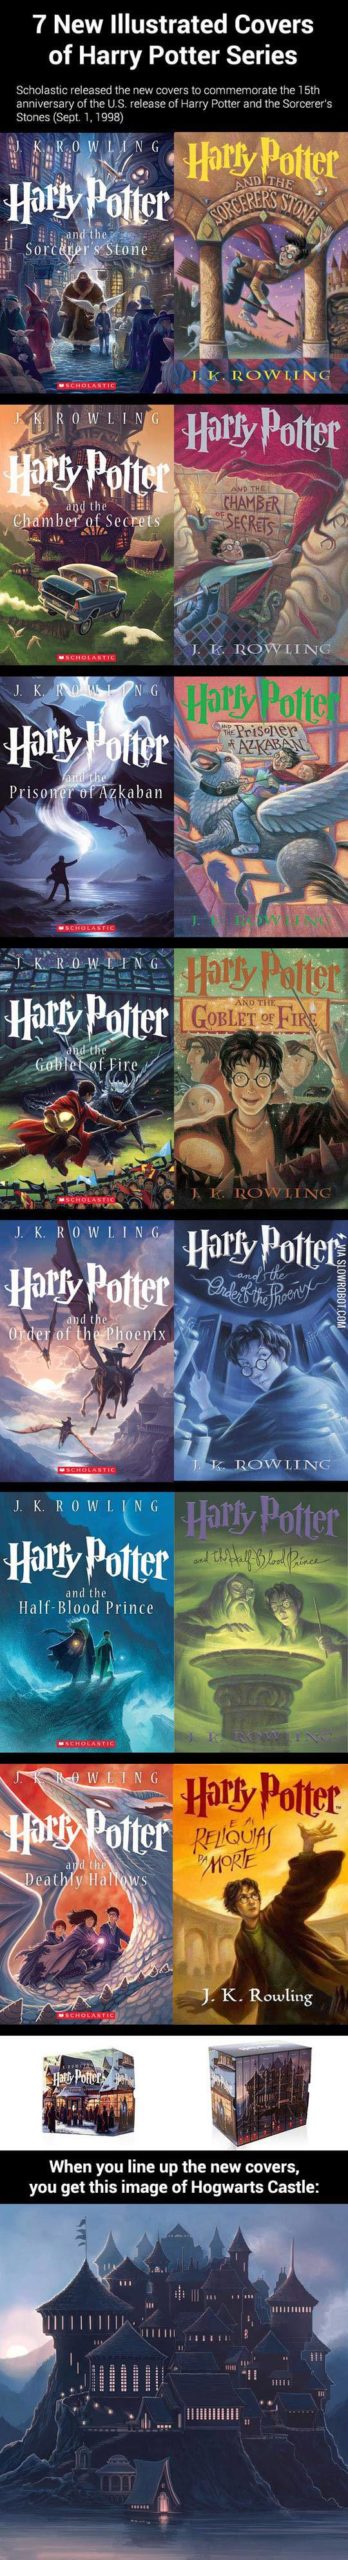 The+new+Harry+Potter+15th+anniversary+book+covers.